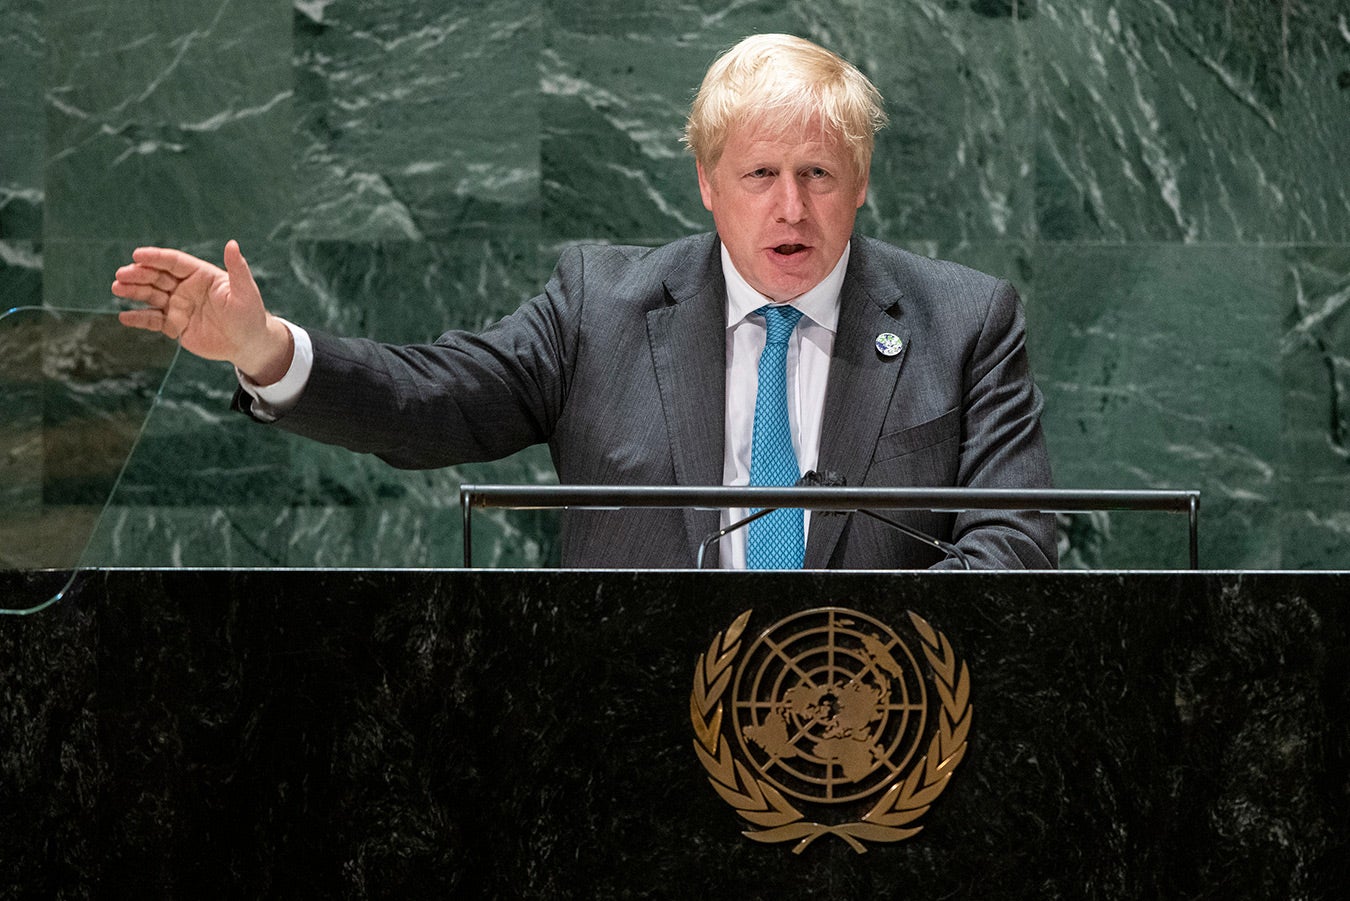 British Prime Minister Boris Johnson addresses the 76th Session of the United Nations General Assembly at UN headquarters in New York, September 22, 2021.